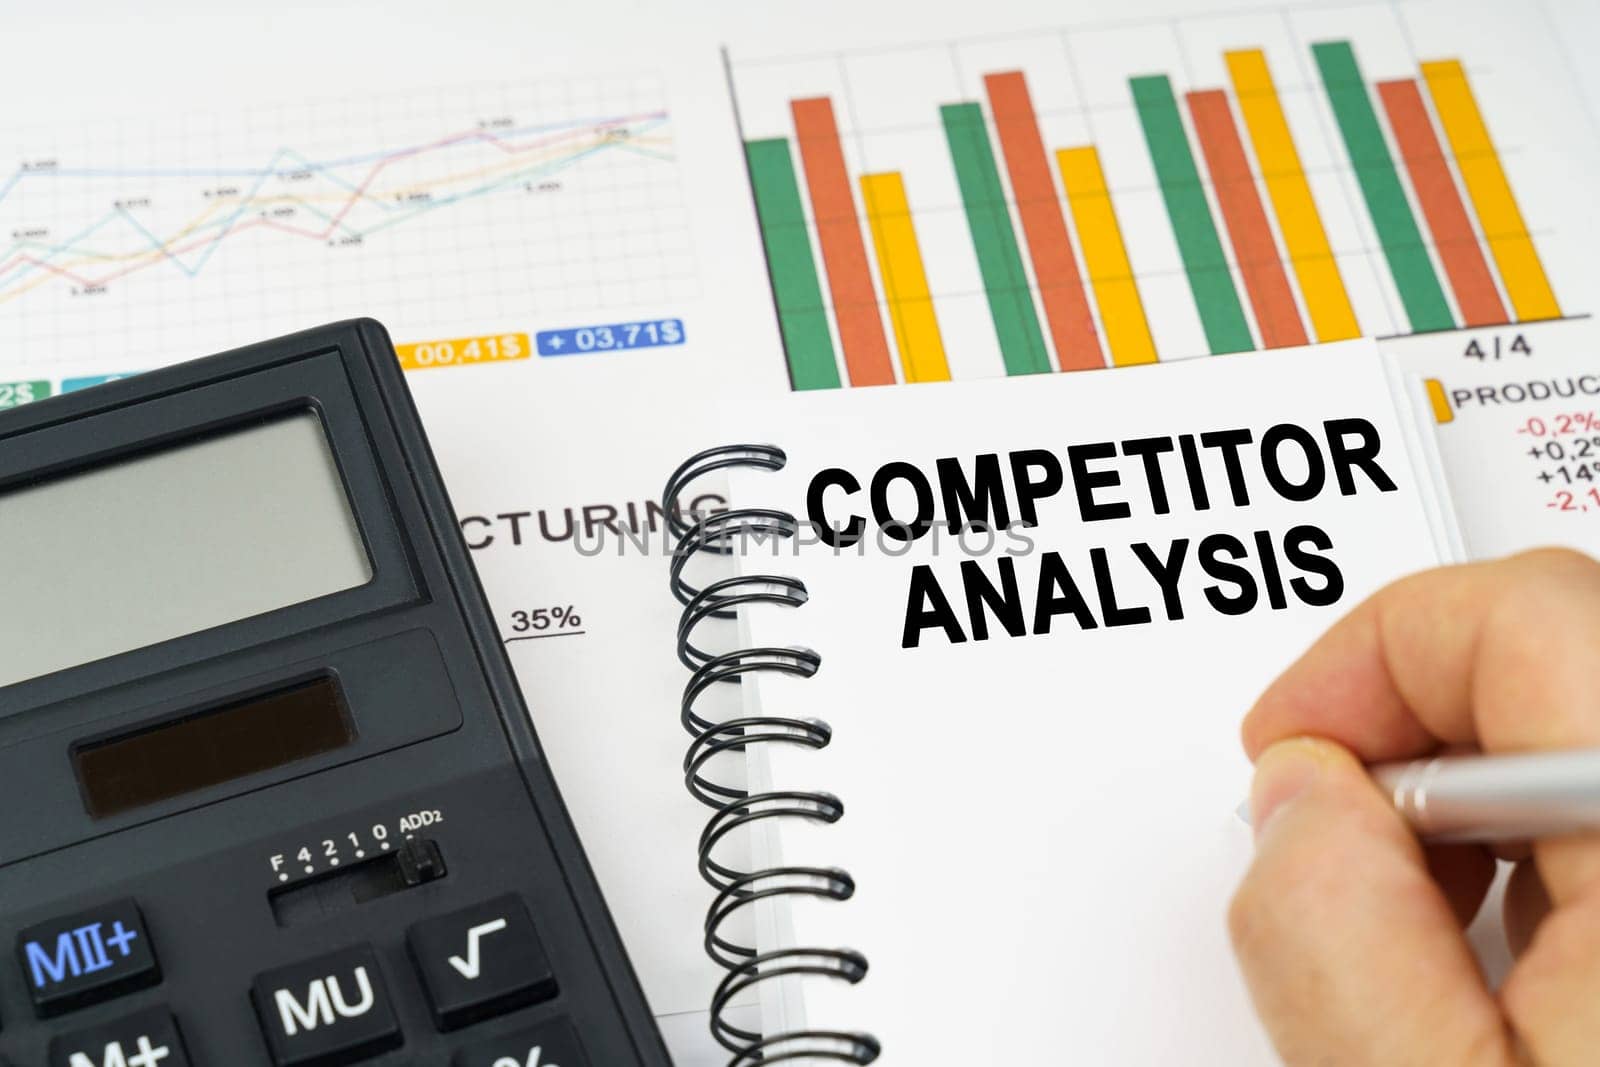 Business concept. There is a calculator on the table, business charts, a man made a note in a notebook - Competitor Analysis